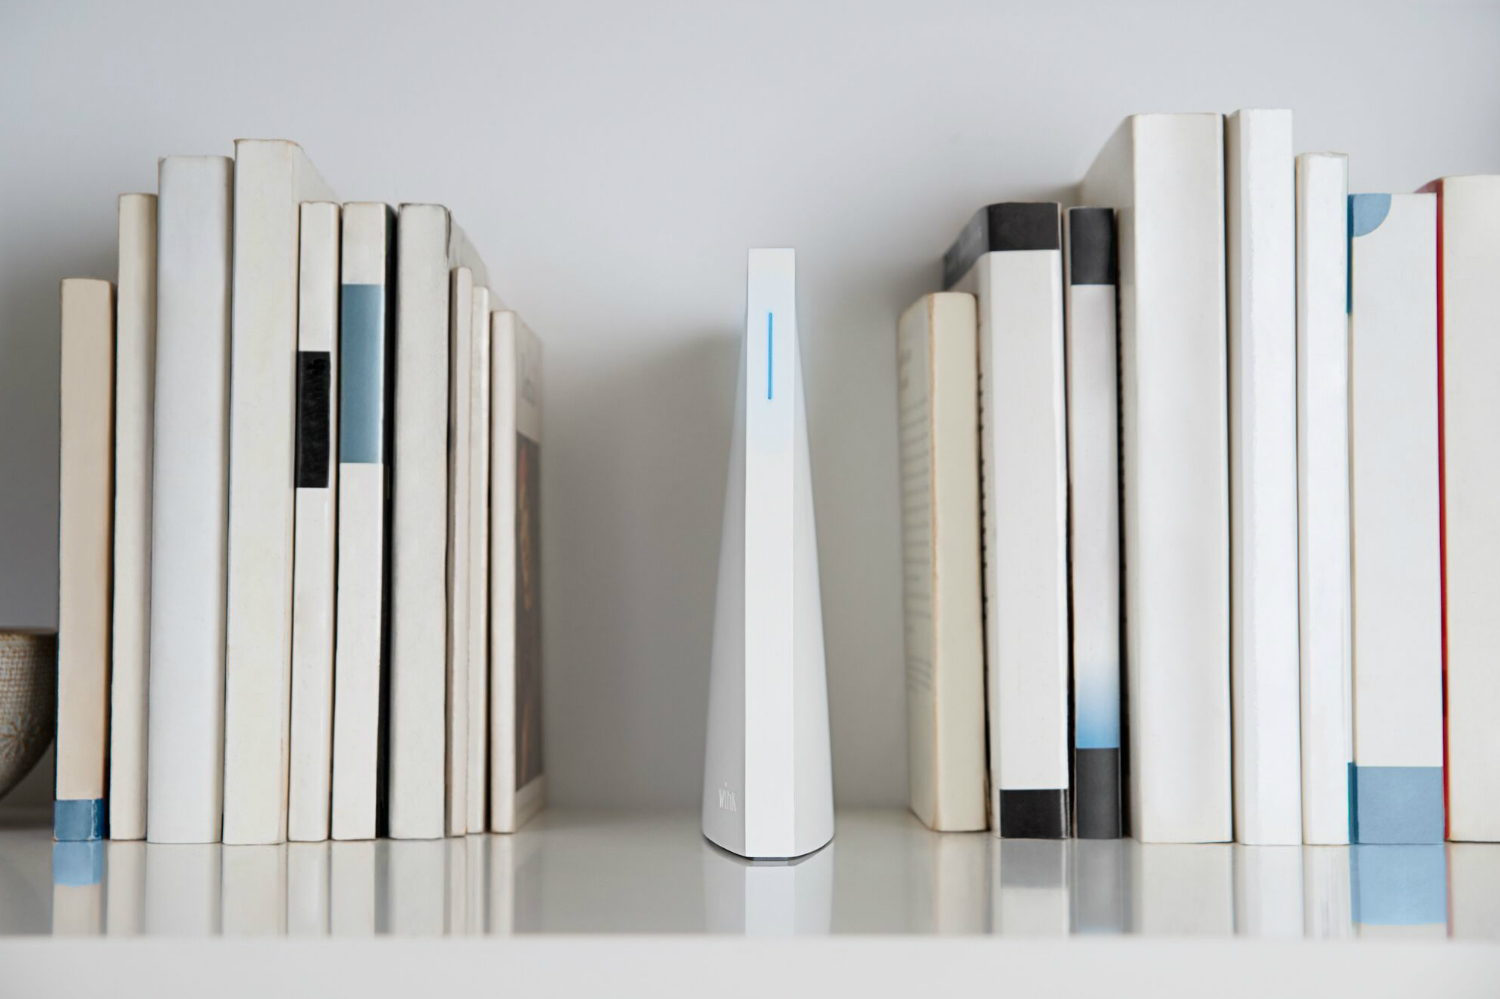 wink introduces its new 99 smart home hub 2 3